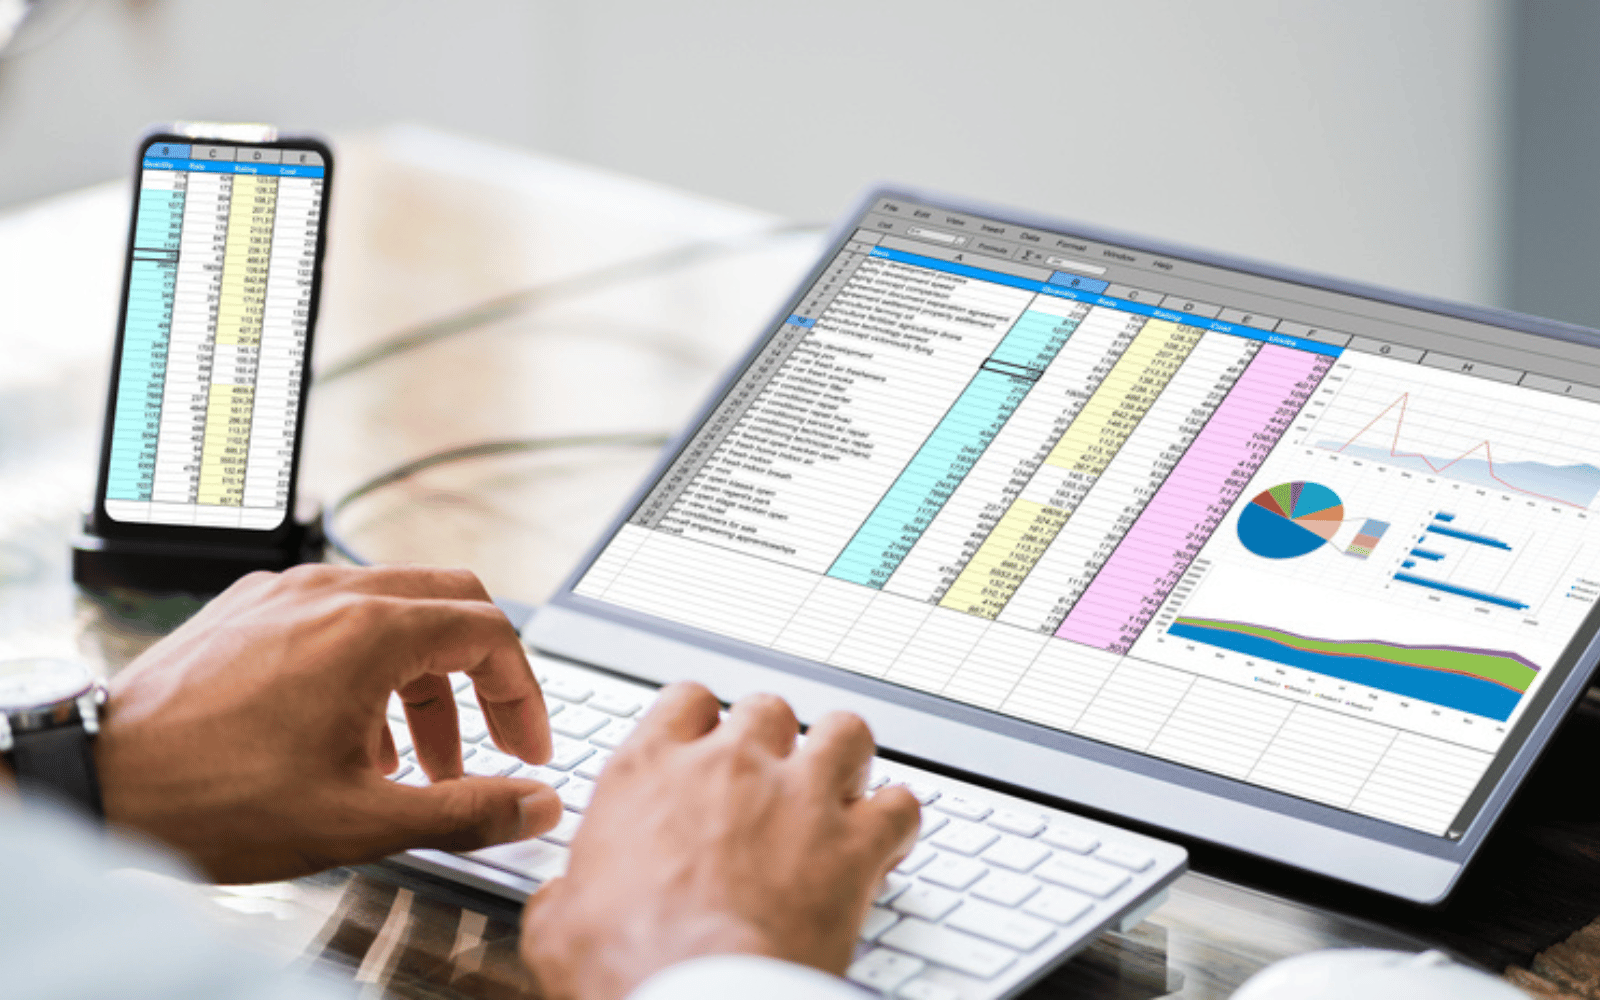 5 Awesome Spreadsheet Apps For the iPhone